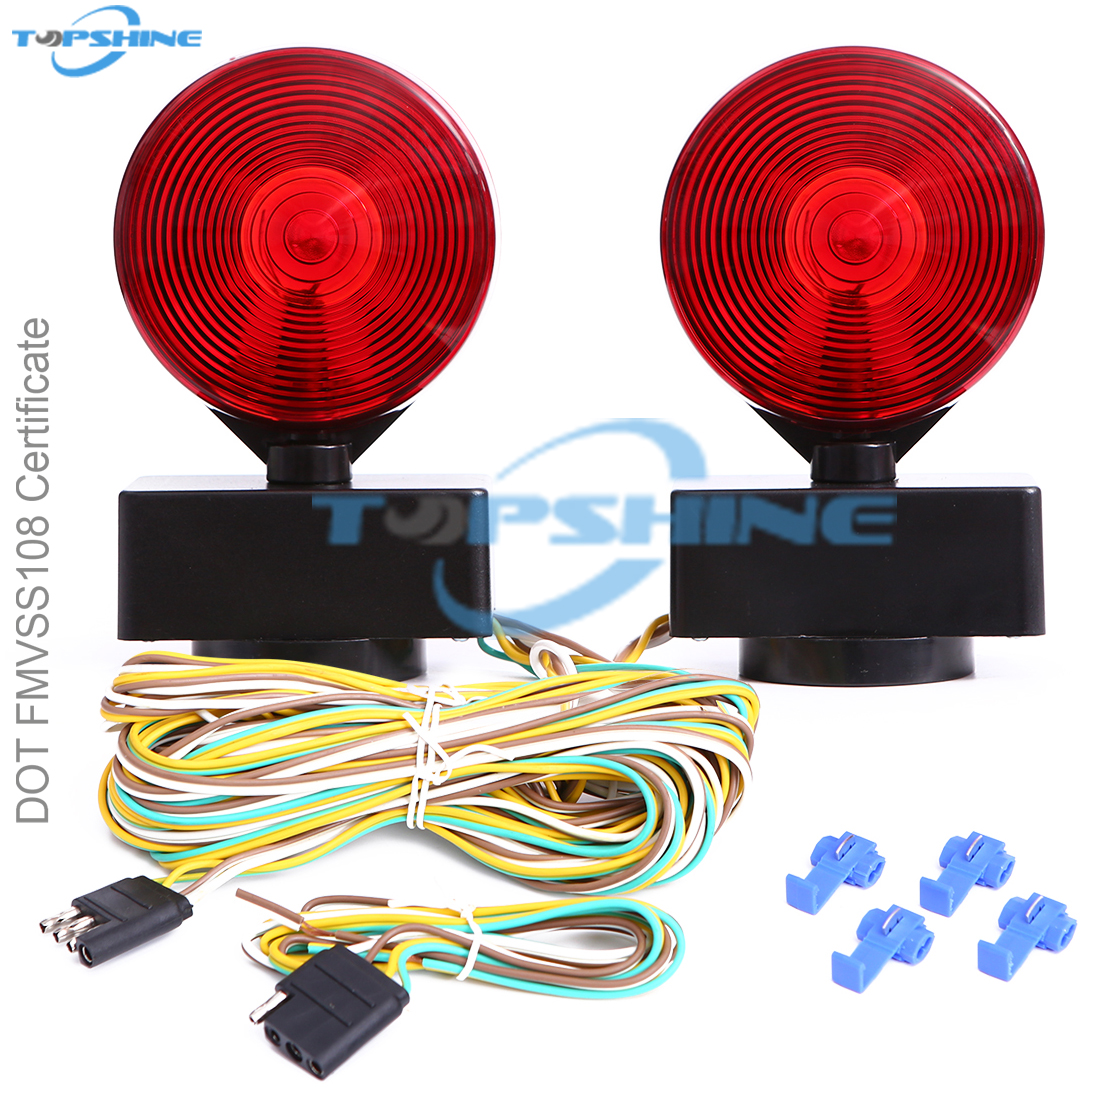 101506 Trailer Light Magnetic Towing Light Kit With 55 Pounds Magnet Featured Image